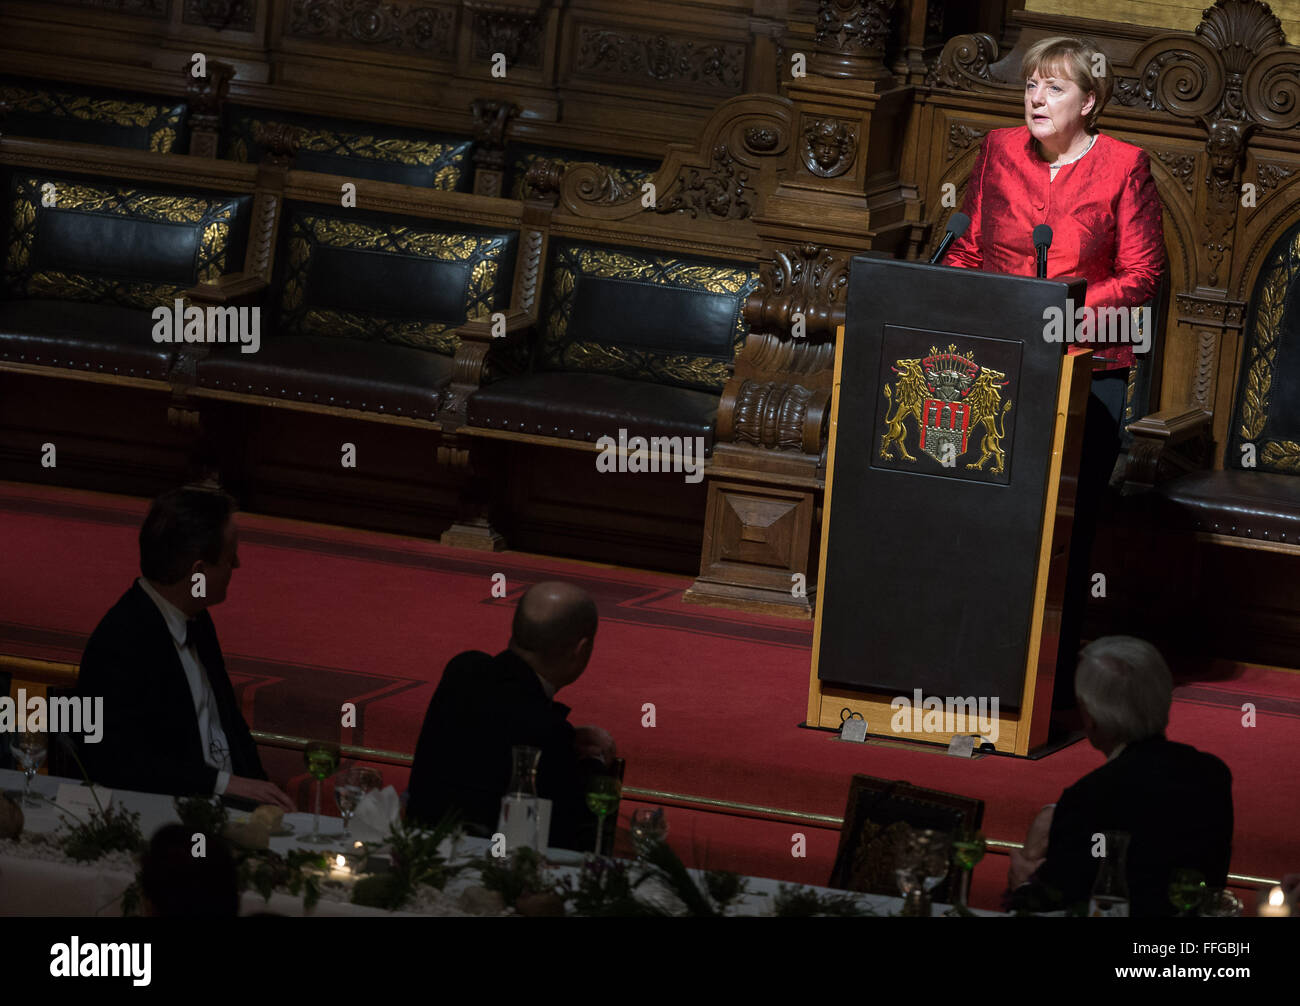 Hamburg, Germany. 12th Feb, 2016. German Chancellor Angela Merkel (back) delivers a speech at the Matthiae dinner, with Britain's Prime Minister David Cameron (L-R), Hamburg's Governing Mayor Olaf Scholz and Michael Otto, former CEO of Otto Group, pictured in the foreground, at the city hall of Hamburg, Germany, 12 February 2016. Britain's Prime Minister David Cameron and German Chancellor Angela Merkel are guests of honour at the oldest feast in the world. Since 1356, the leaders of the Hansa city invite distinguished guests to the Matthiae dinner. Photo: LUKAS SCHULZE/dpa/Alamy Live News Stock Photo